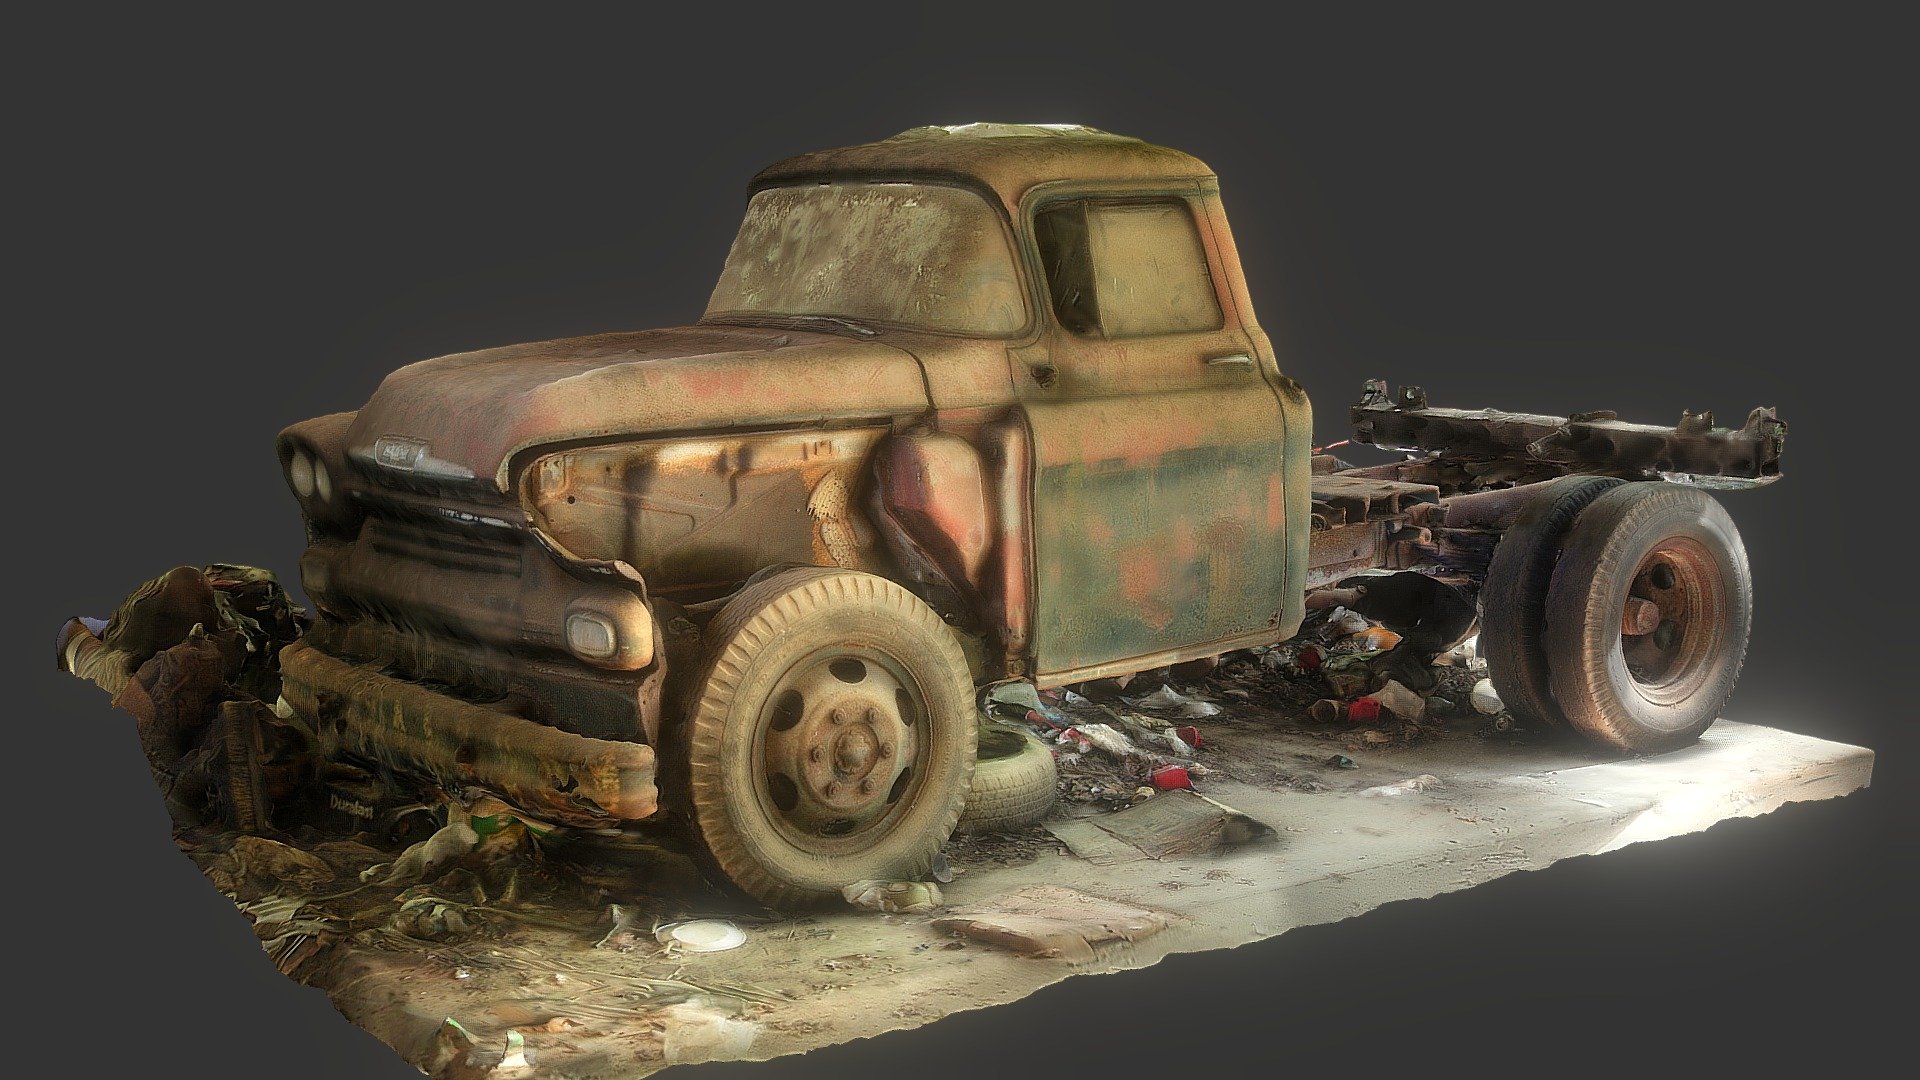 A re-scan of the truck that I scanned earlier, this one is more complete. It's a 1958 Chevrolet Viking 3d model